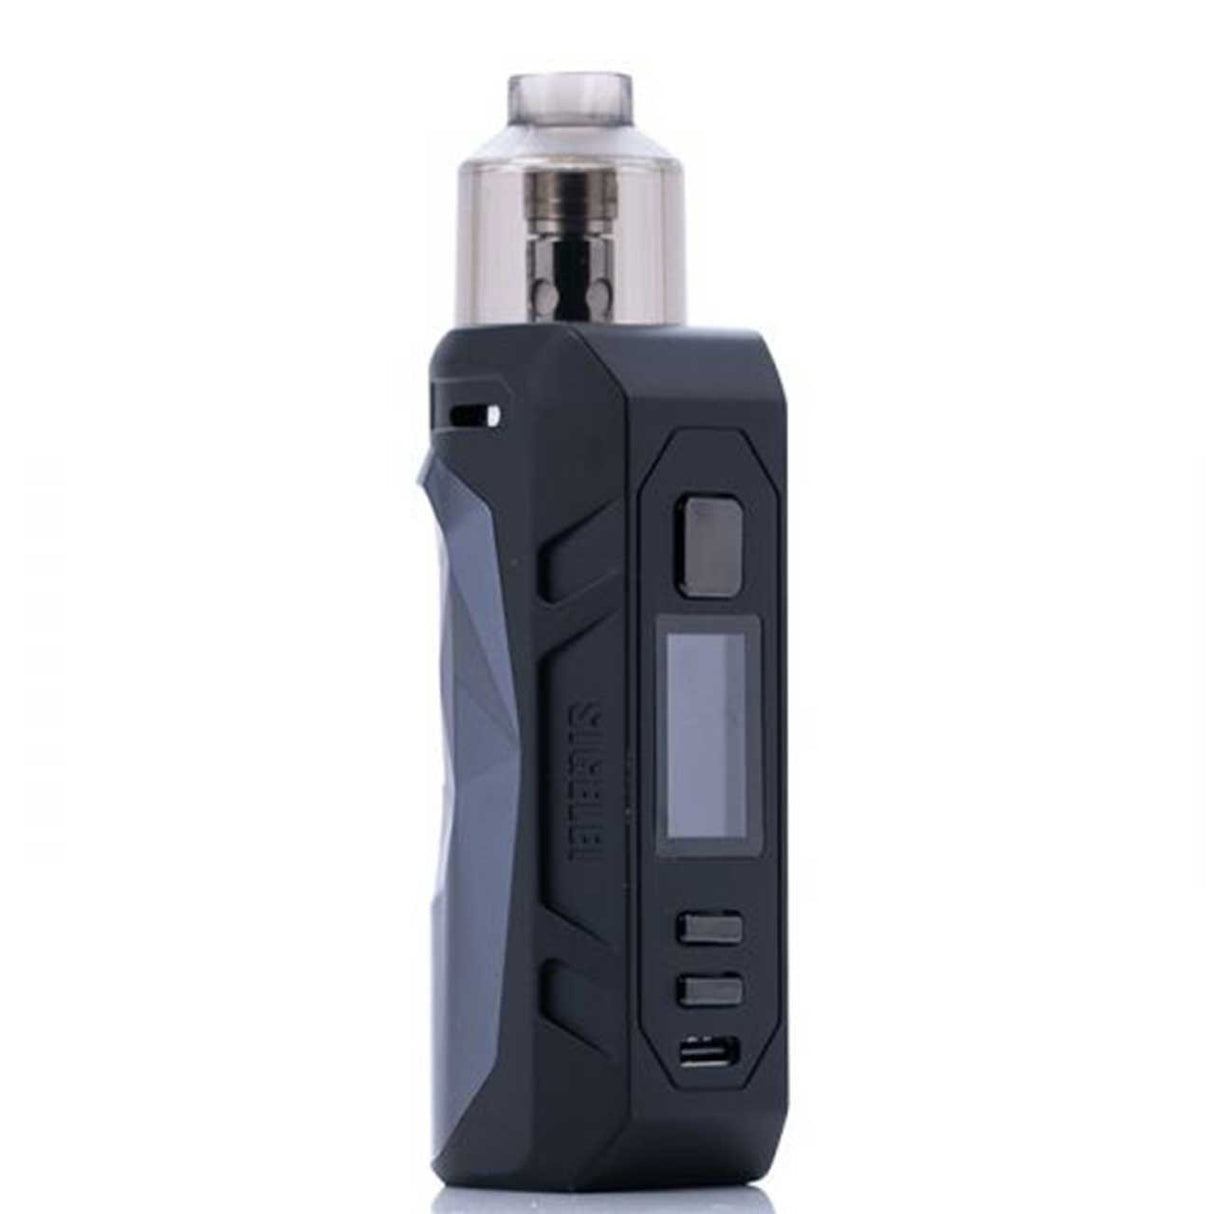 Sigelei HUMVEE 80W Box Mod Starter Kit with zinc-alloy body and rubberized hand grip. Portable design